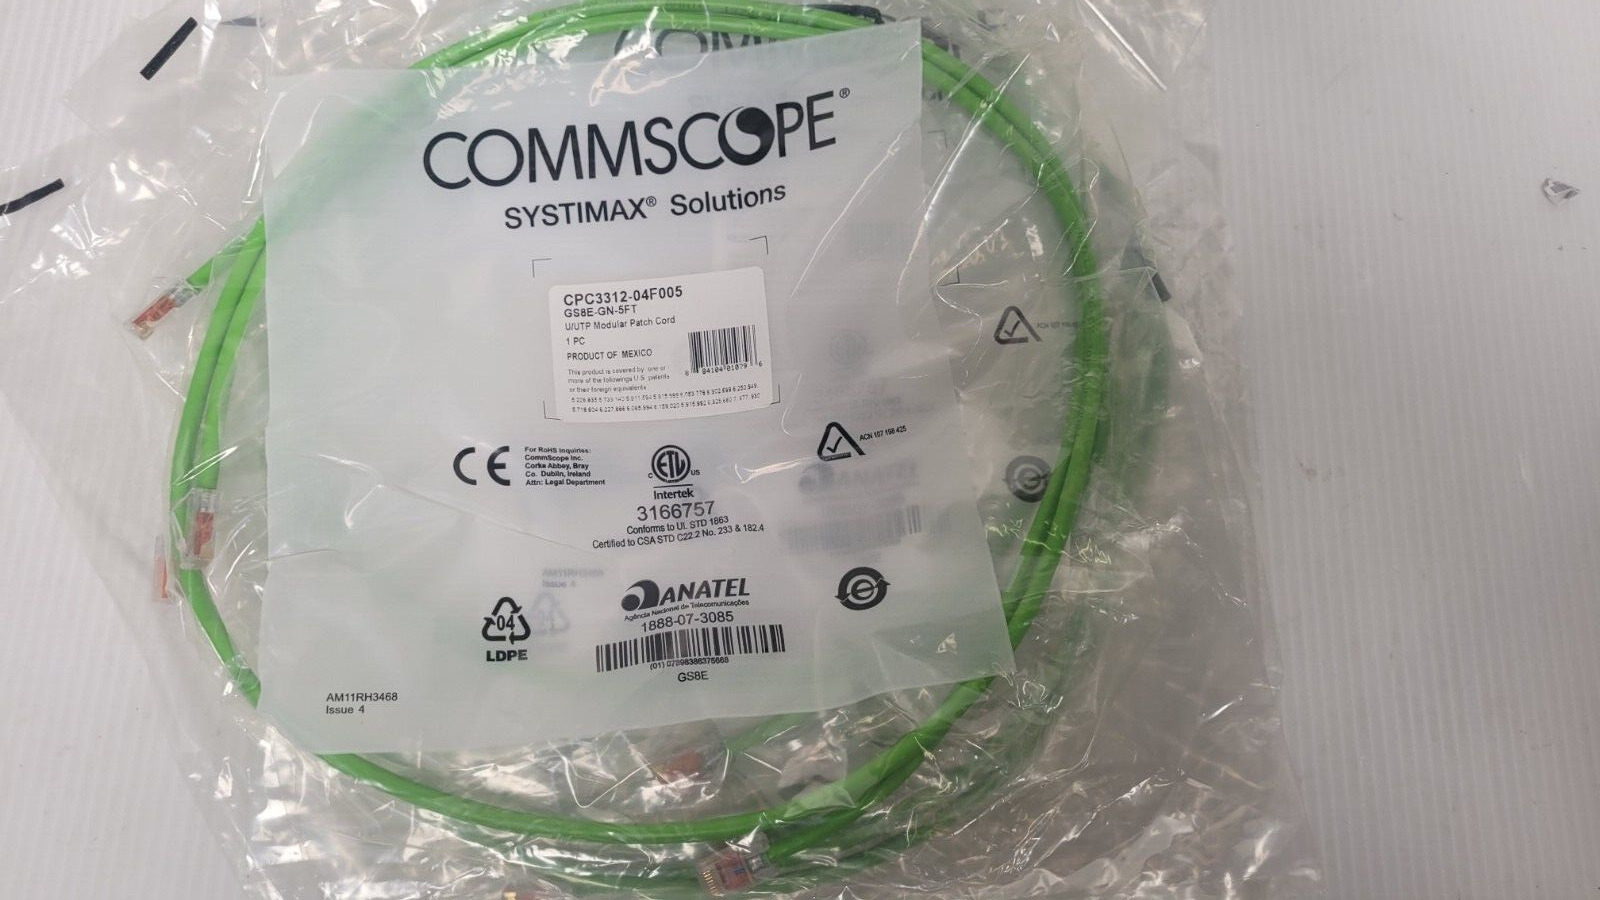 Lot of 5 Commscope Systimax 5FT Ethernet U/UTP Modular Patch Cords GS8E-GN-5FT